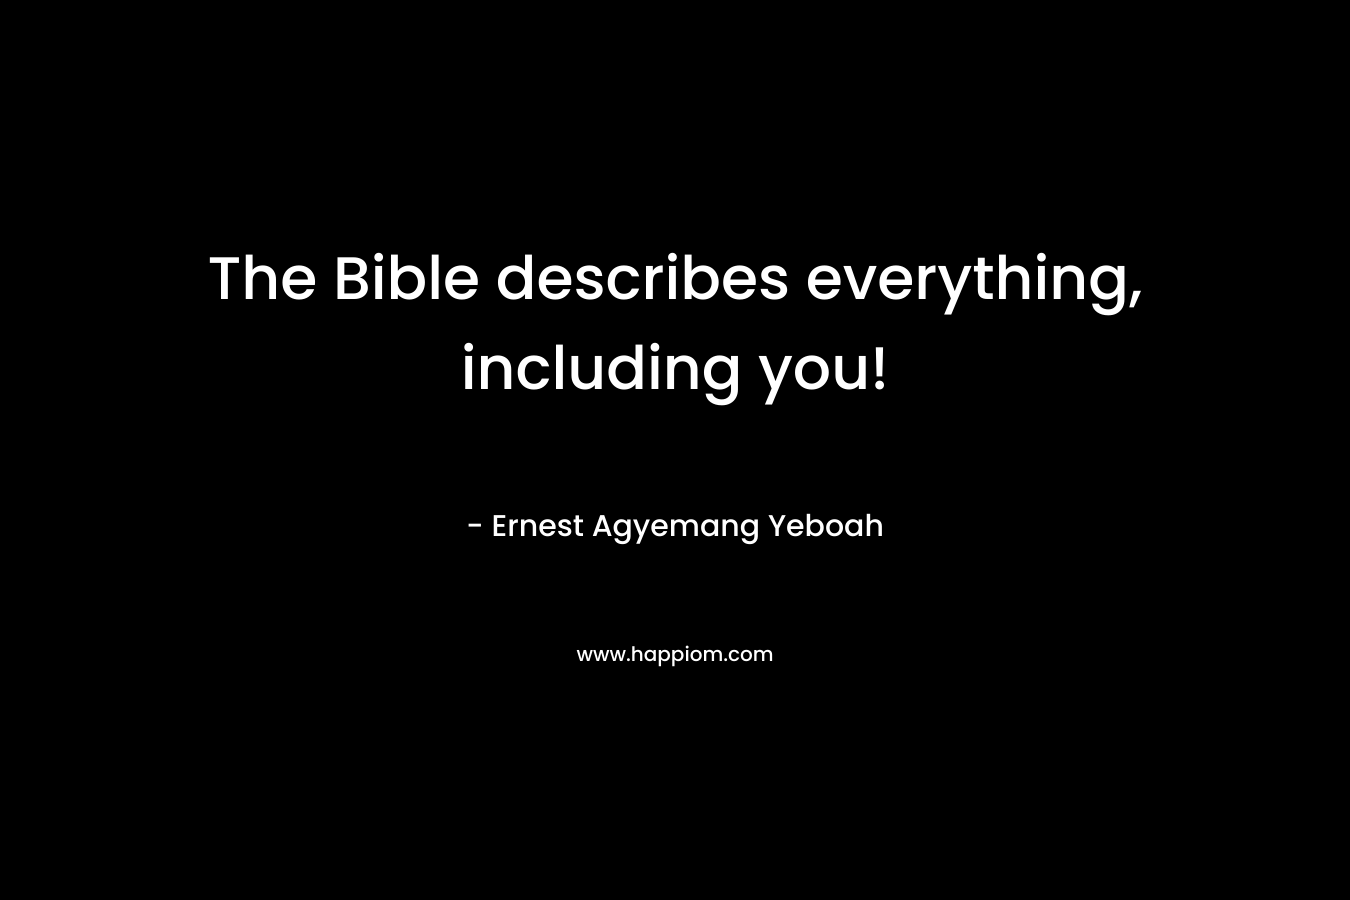 The Bible describes everything, including you! – Ernest Agyemang Yeboah